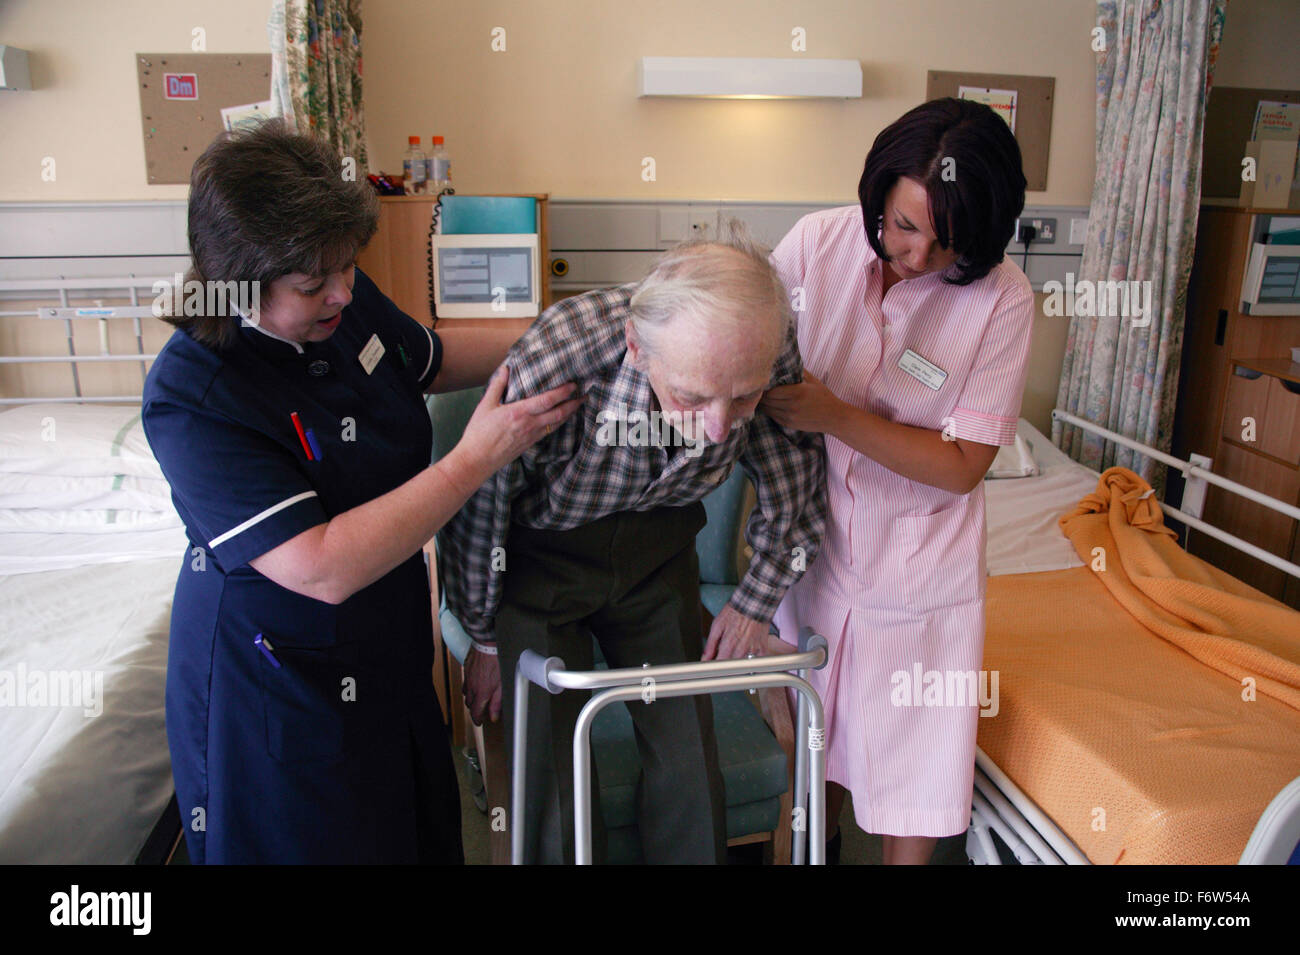 Nurse with disability and health care worker assisting elderly patient to mobilise and transfer into chair using Zimmer frame, Stock Photo